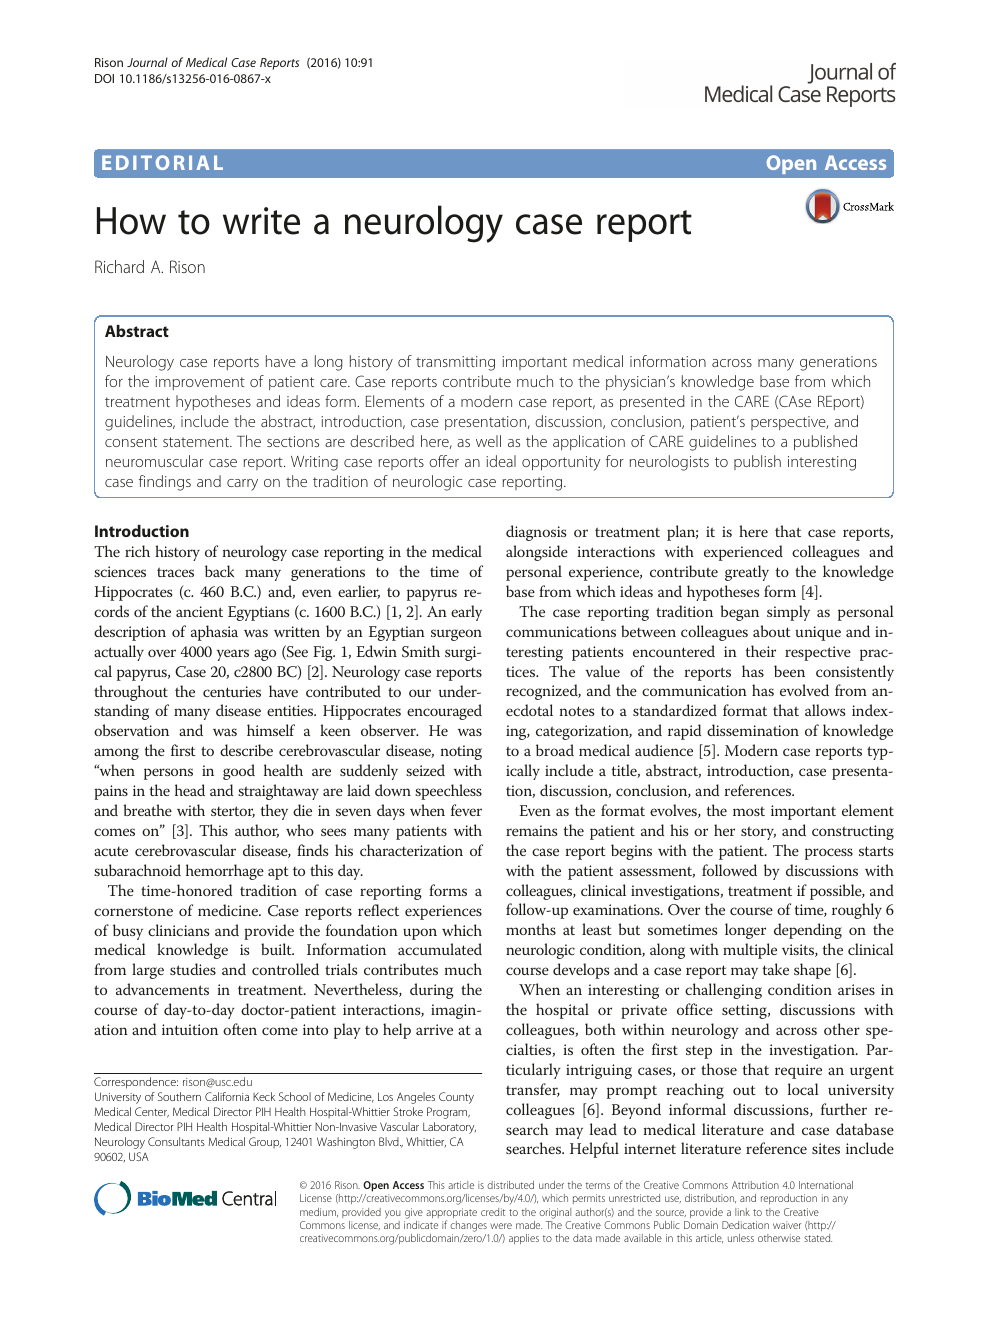 How to write a neurology case report – topic of research paper in